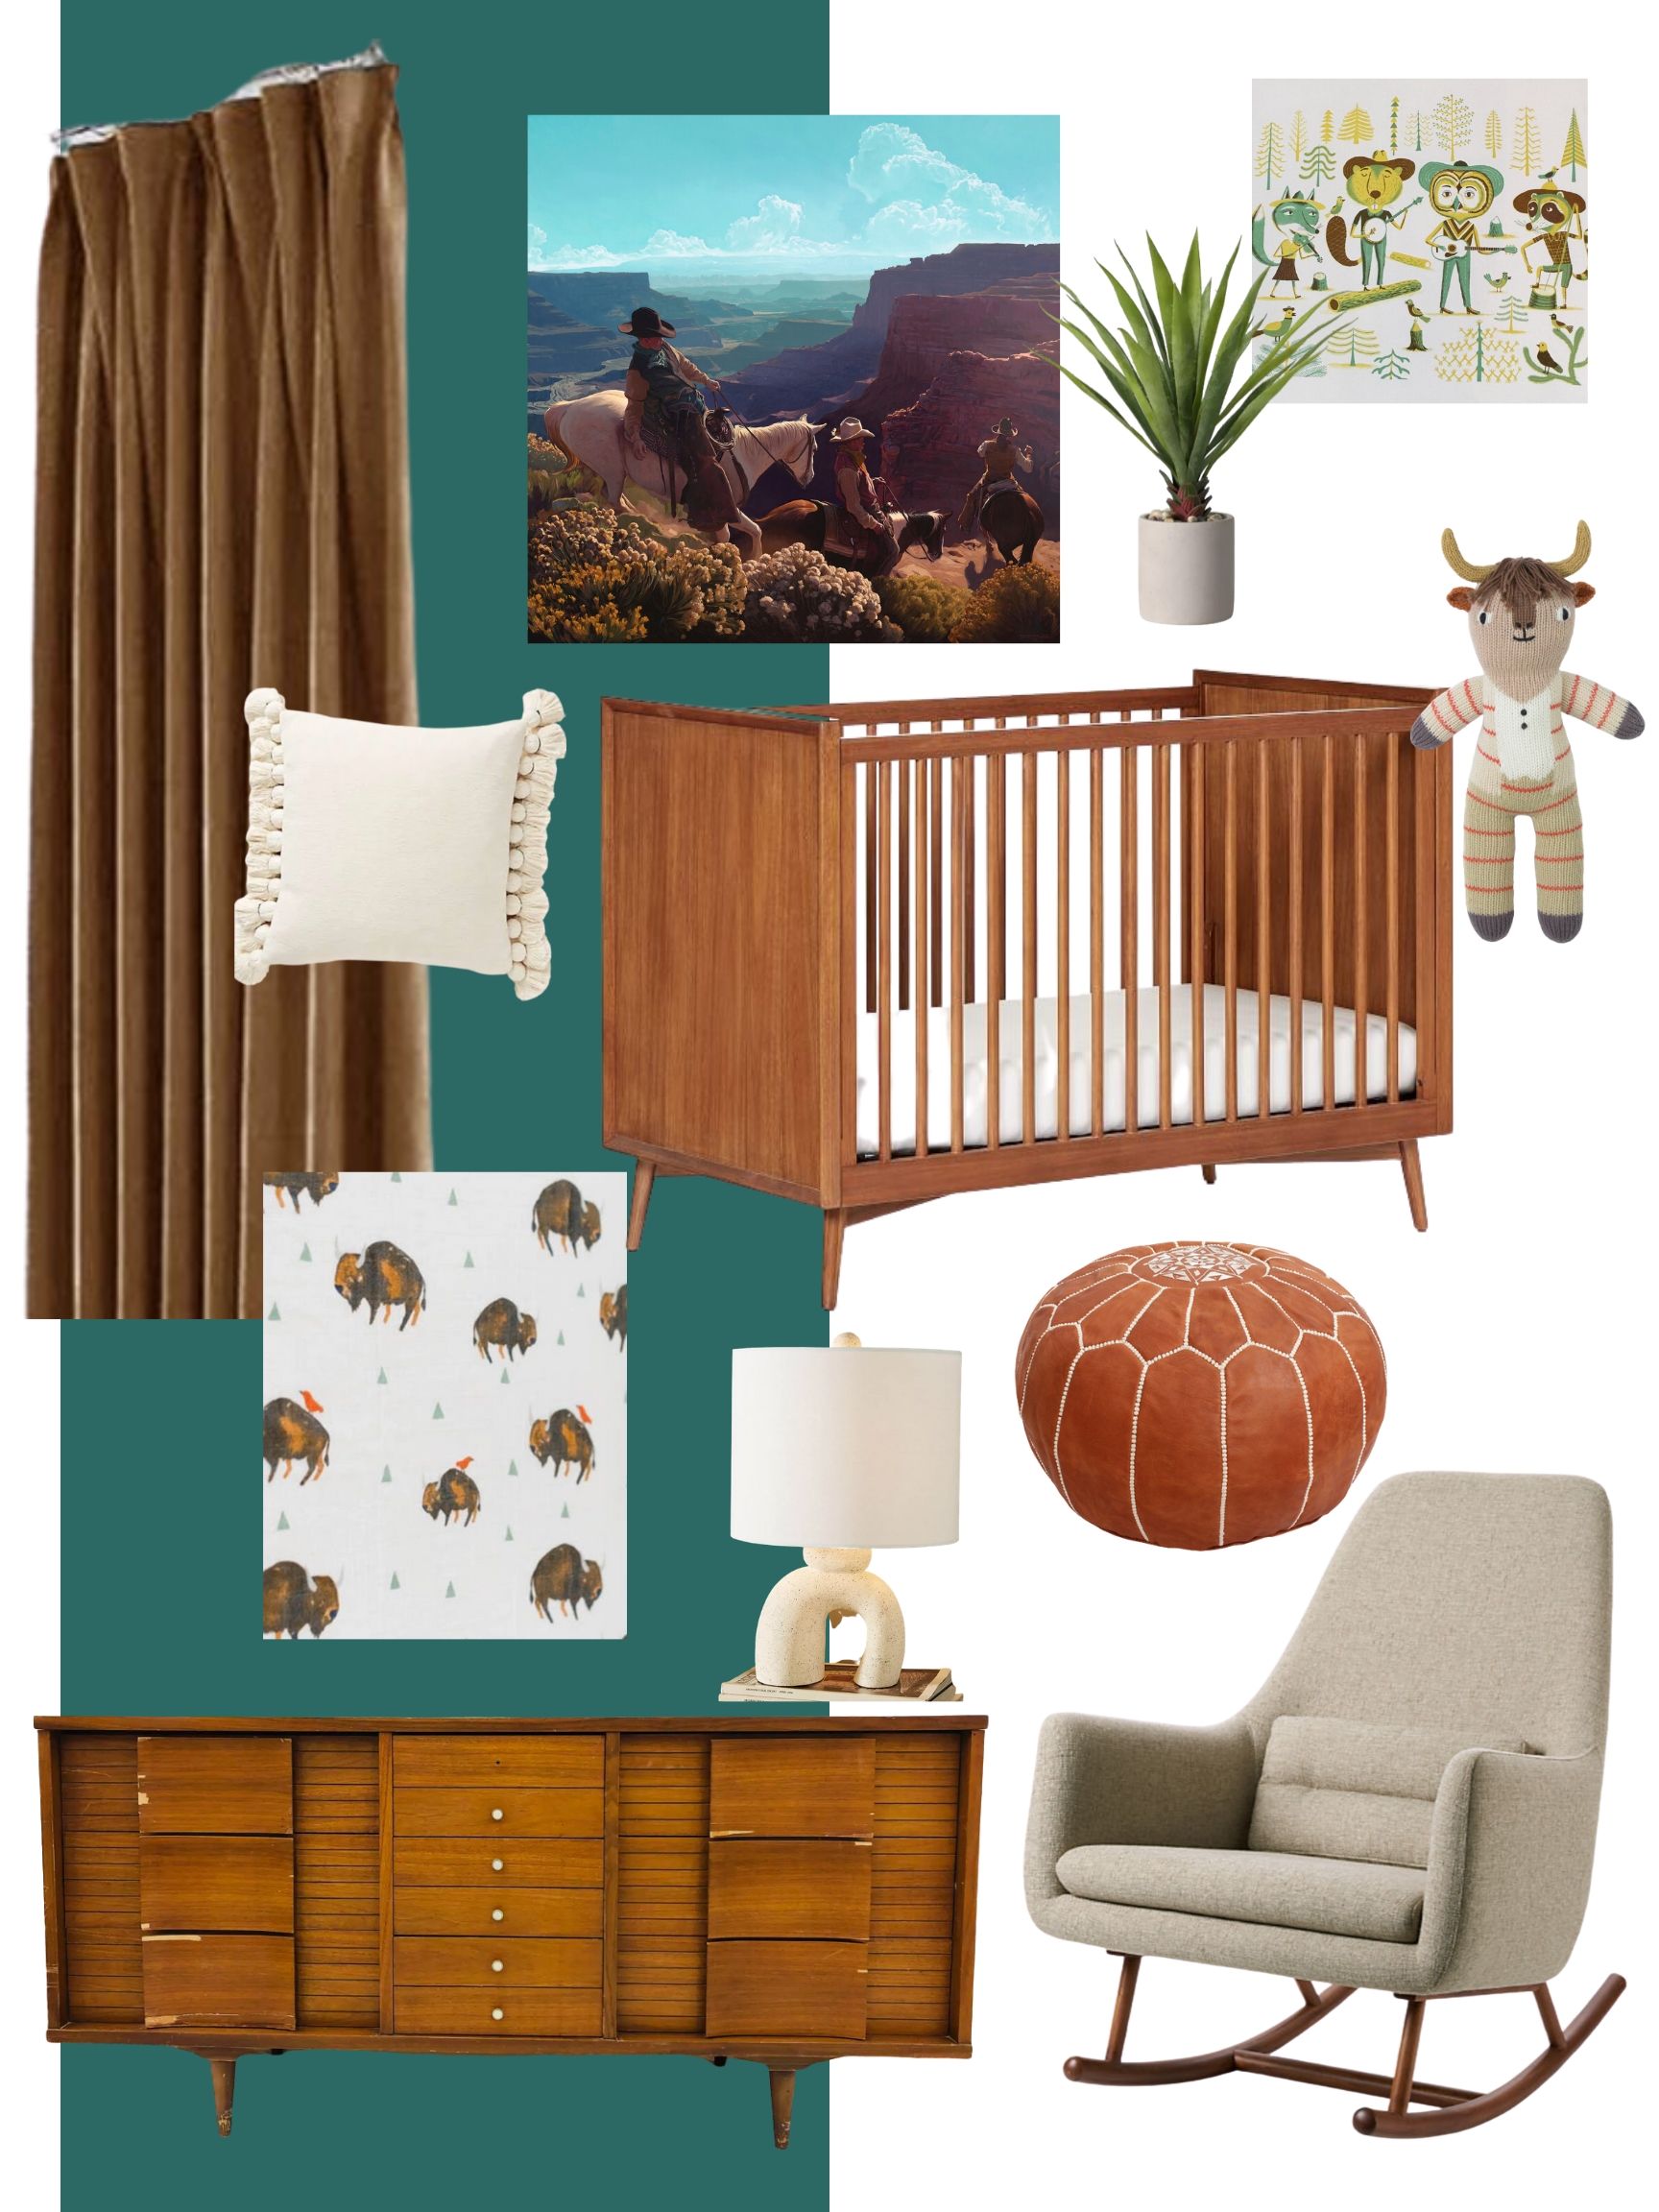 Western Nursery by popular Memphis life and style blog, Lone Star Looking Glass: collage image of a Anthropologie Mesa Ceramic Table Lamp, AllModern Cherise Leather Pouf, CB2 SAIC QUANTAM GUNSMOKE ROCKING CHAIR, Blabla Kids Pablo the Longhorn Knit Doll, Target Bison Little Unicorn Cotton Muslin Fitted Crib Sheet, Target 17" Yucca in Pot, Anthropologie Tasseled Chenille Nadia Pillow, Pottery Barn Kids West Elm X Pbk Mid-Century Convertible Crib, and Amazon jinchan Velvet Curtain.